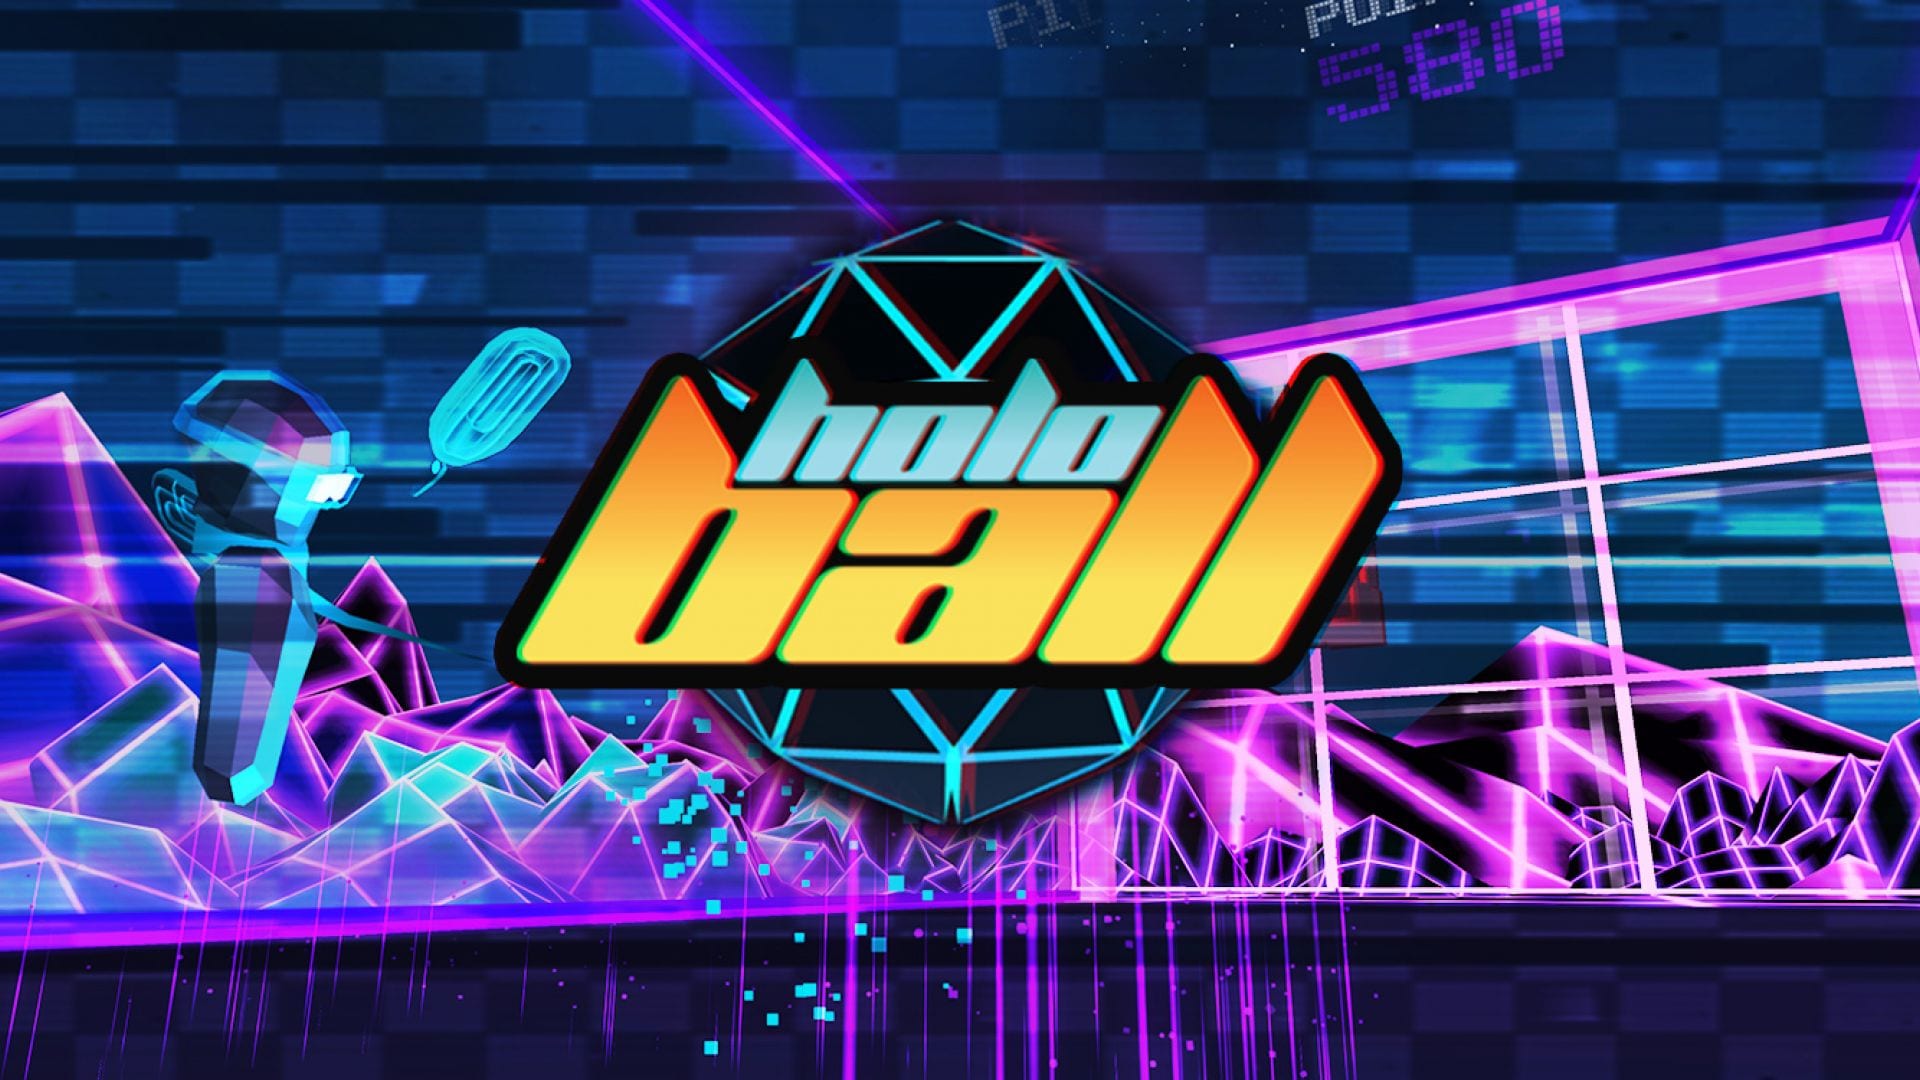 Review: Holoball - PS4/PSVR